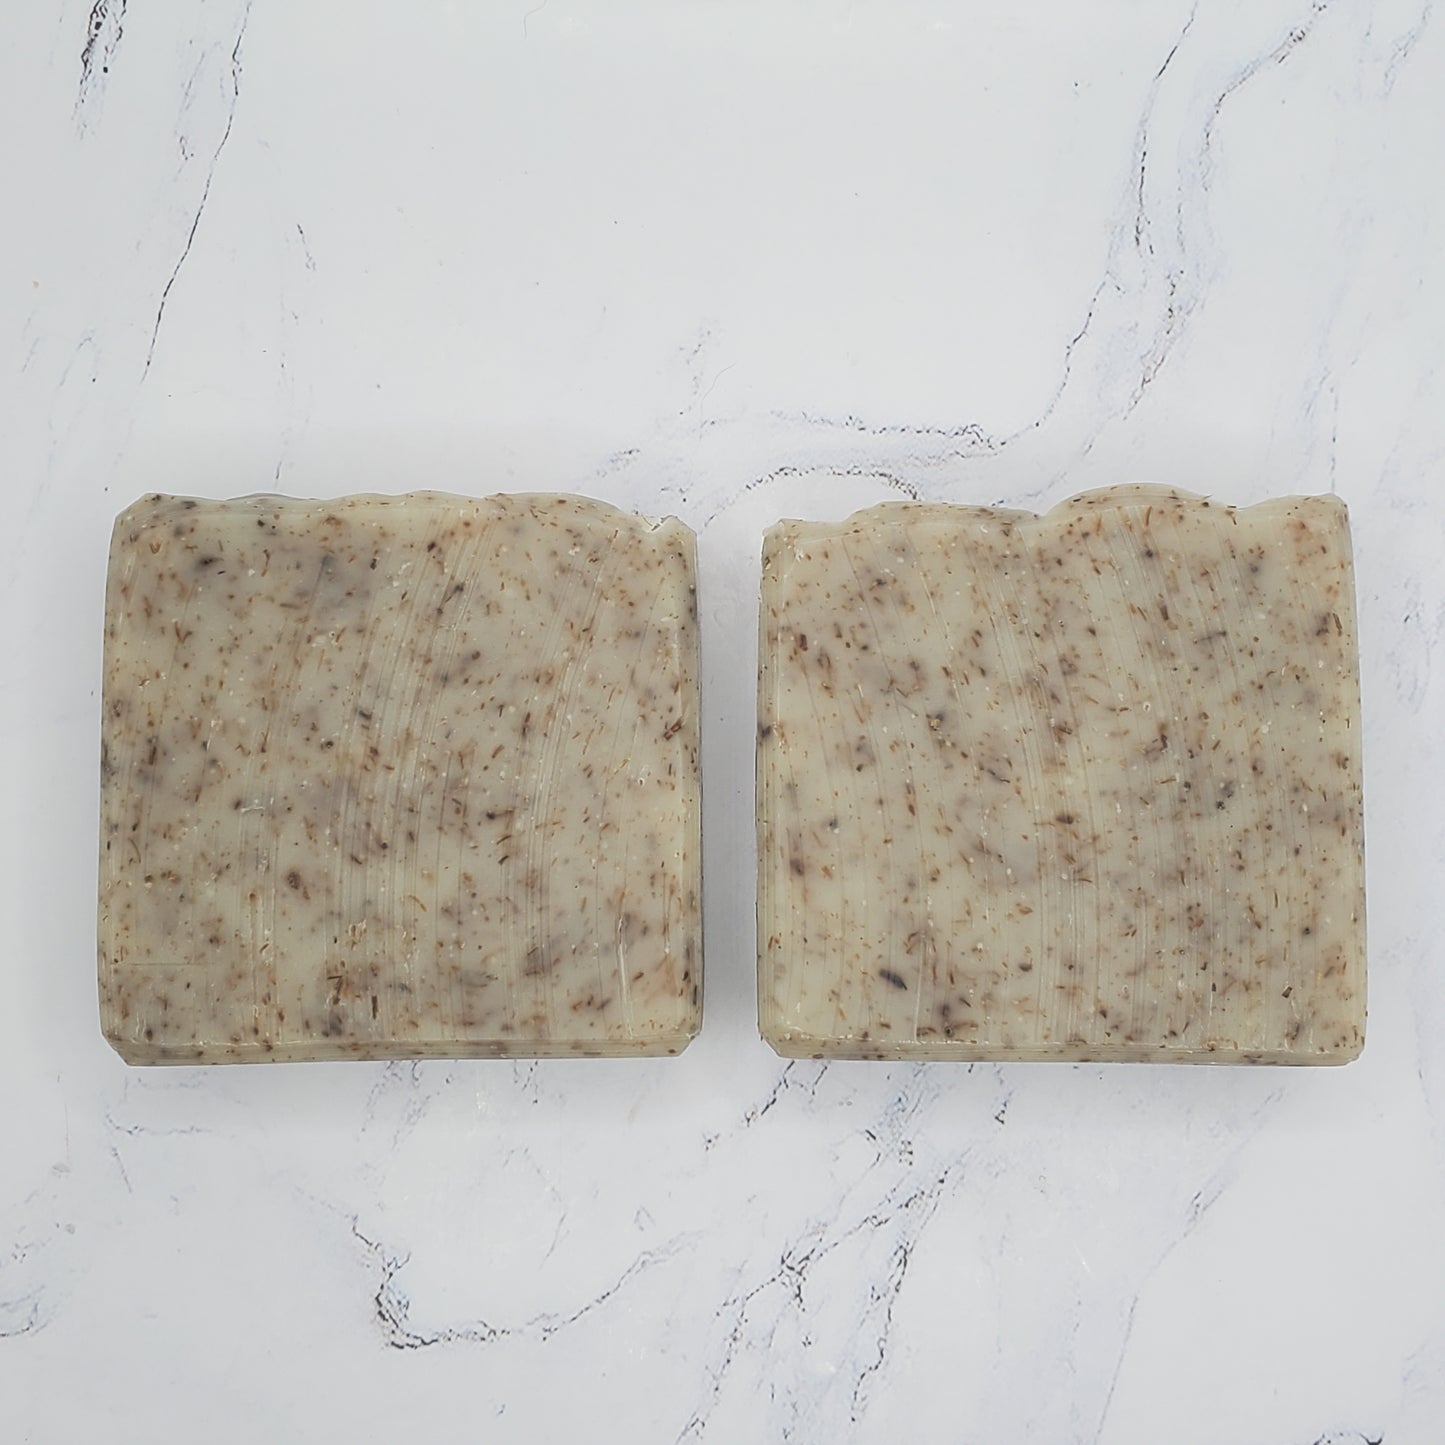 Lavender & Rice Bar Soap with Lavender and Cedarwood Essential Oils